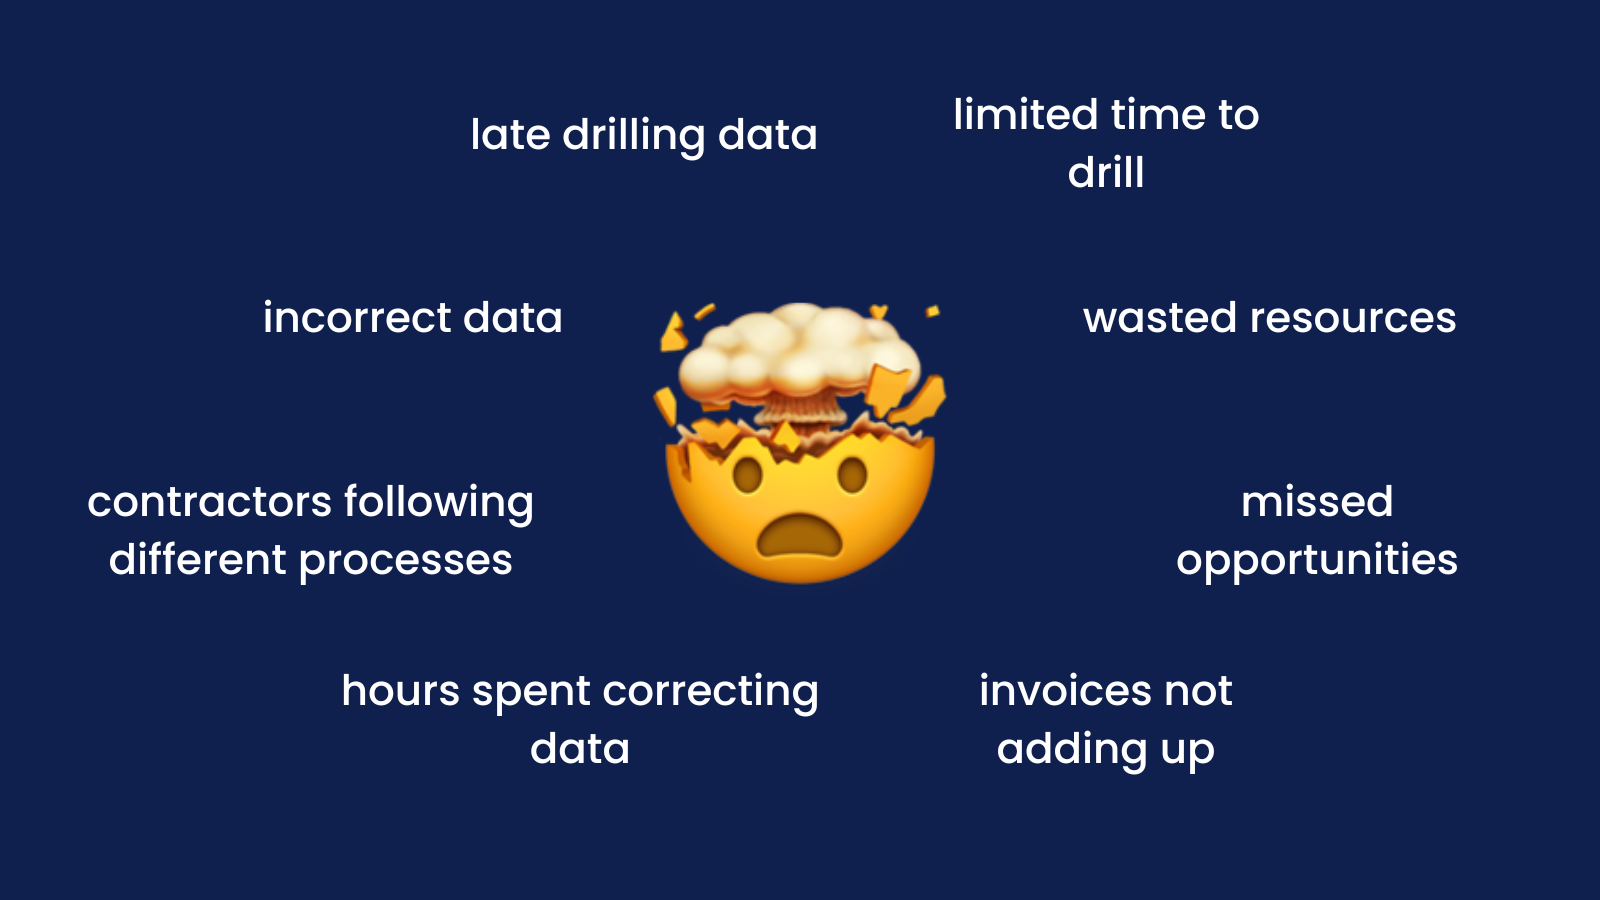 Image shows the common problems experienced by exploration managers